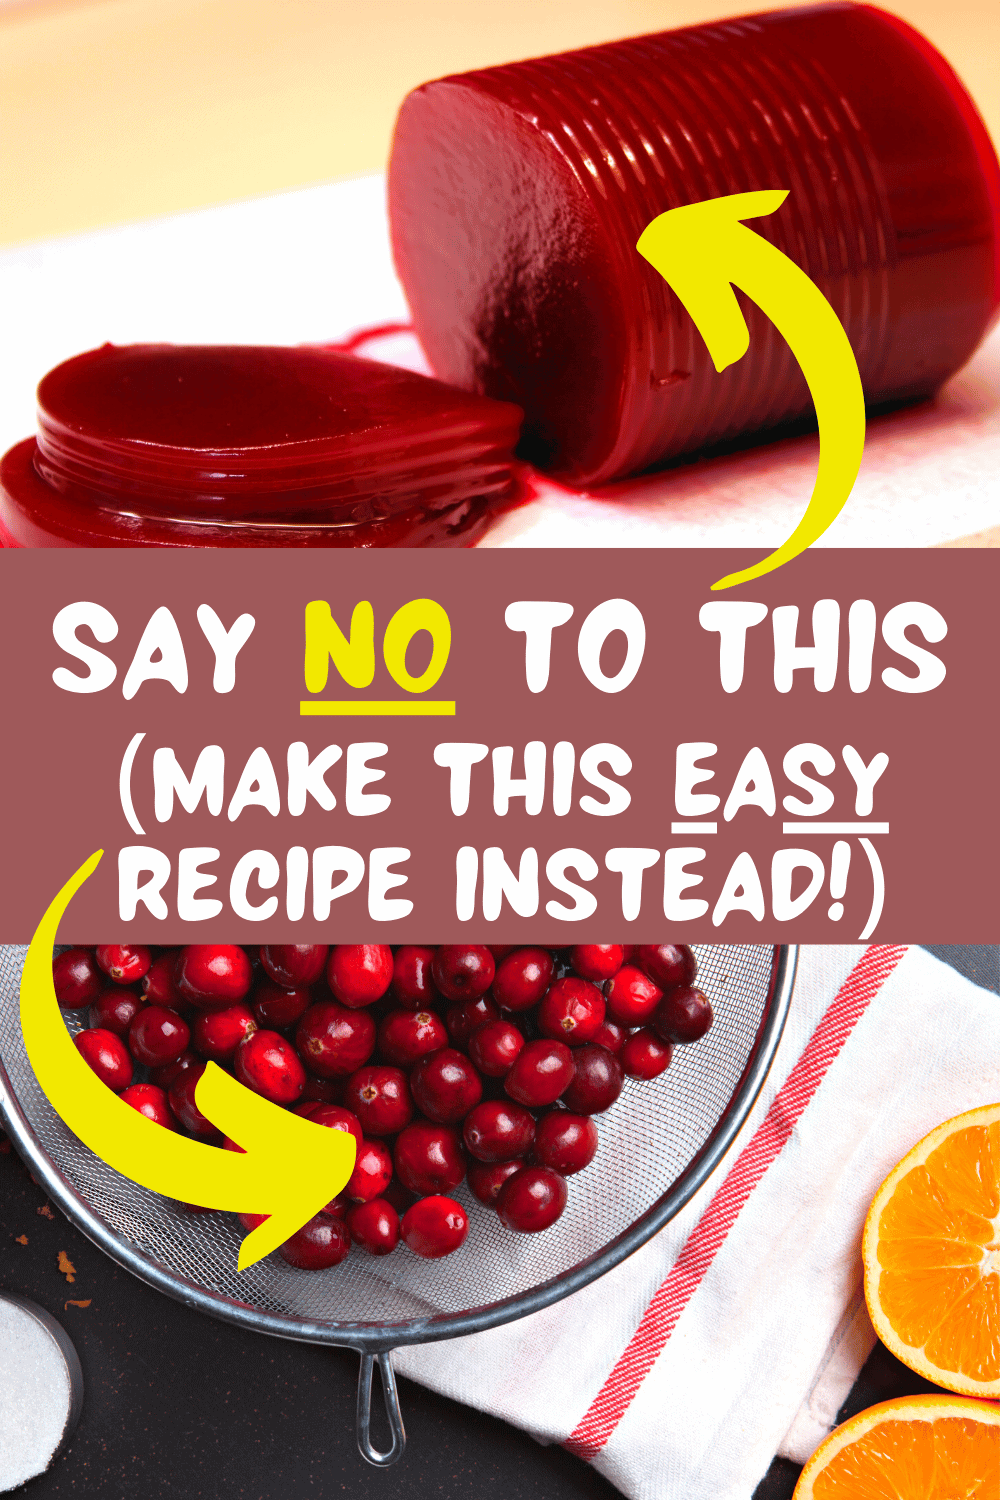 cranberry homemade sauce vs canned cranberry sauce (how to make homemade cranberries)